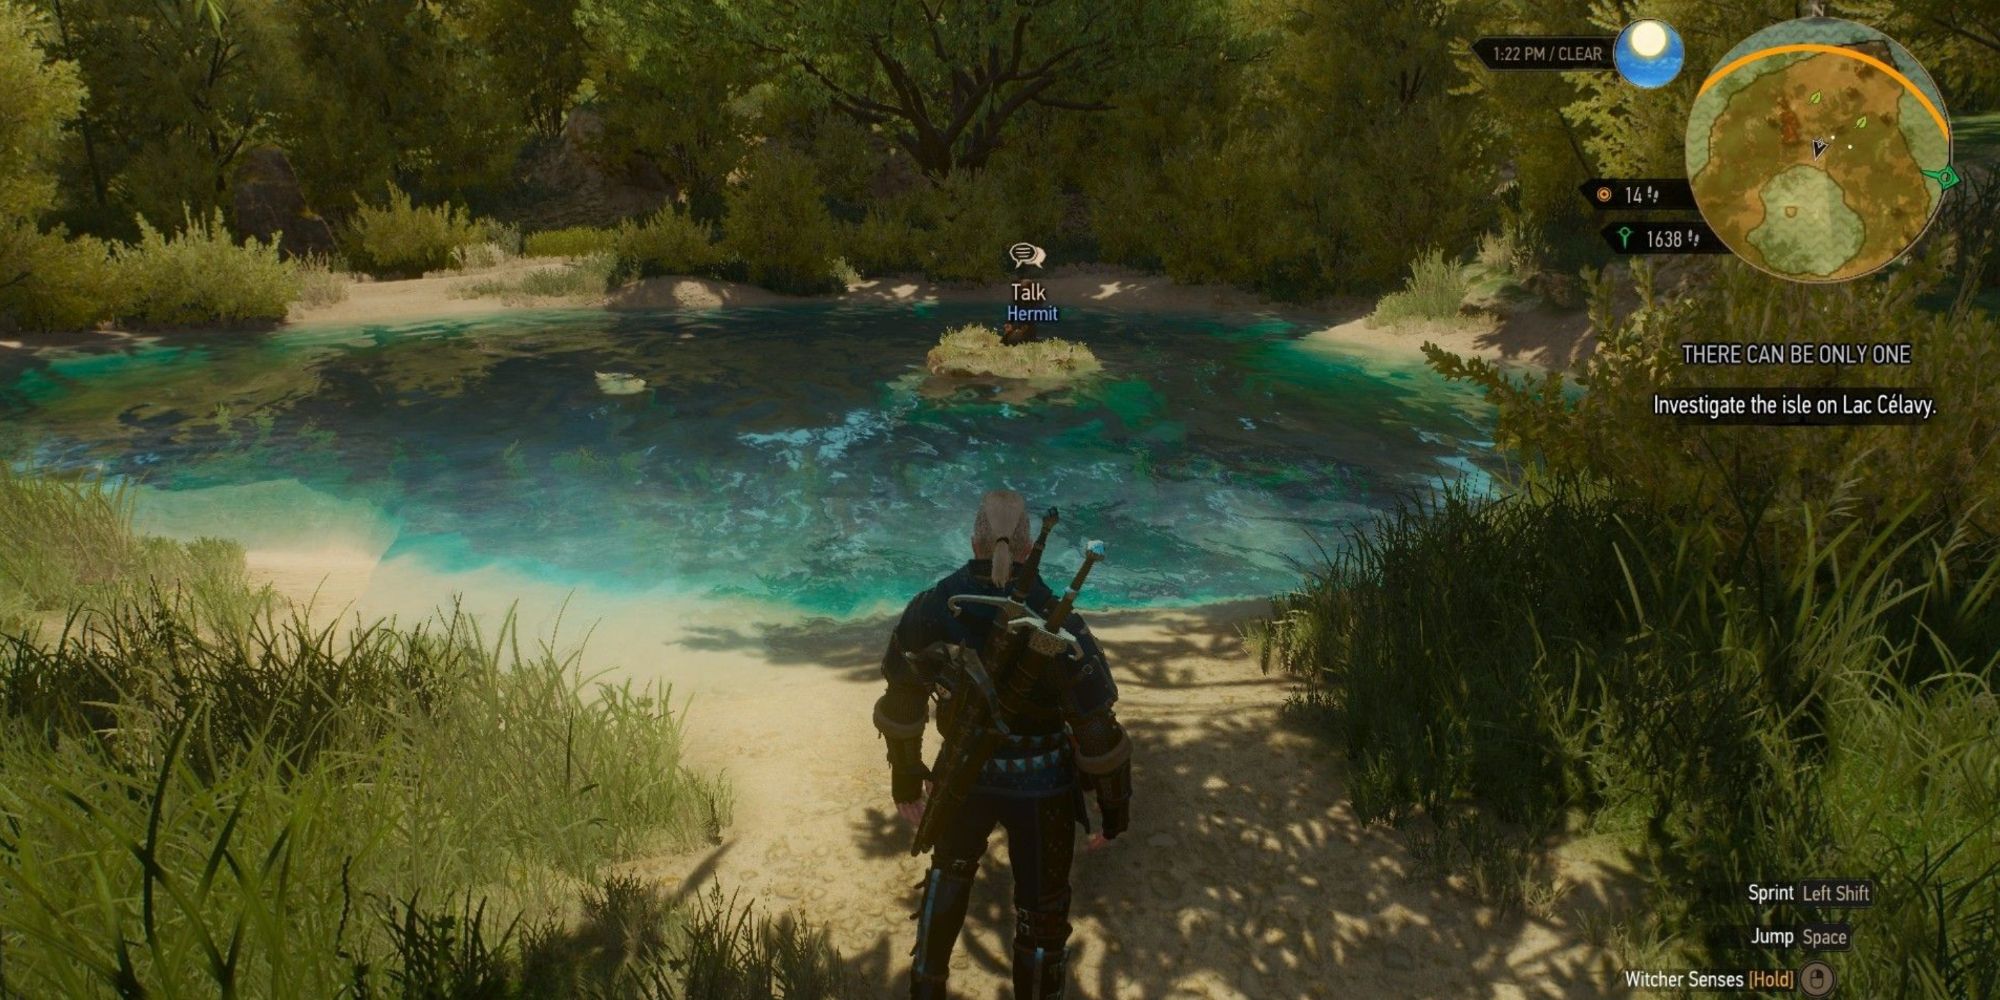 Geralt facing the Hermit in the middle of Lac Célavy in The Witcher 3 Wild Hunt Blood and Wine DLC